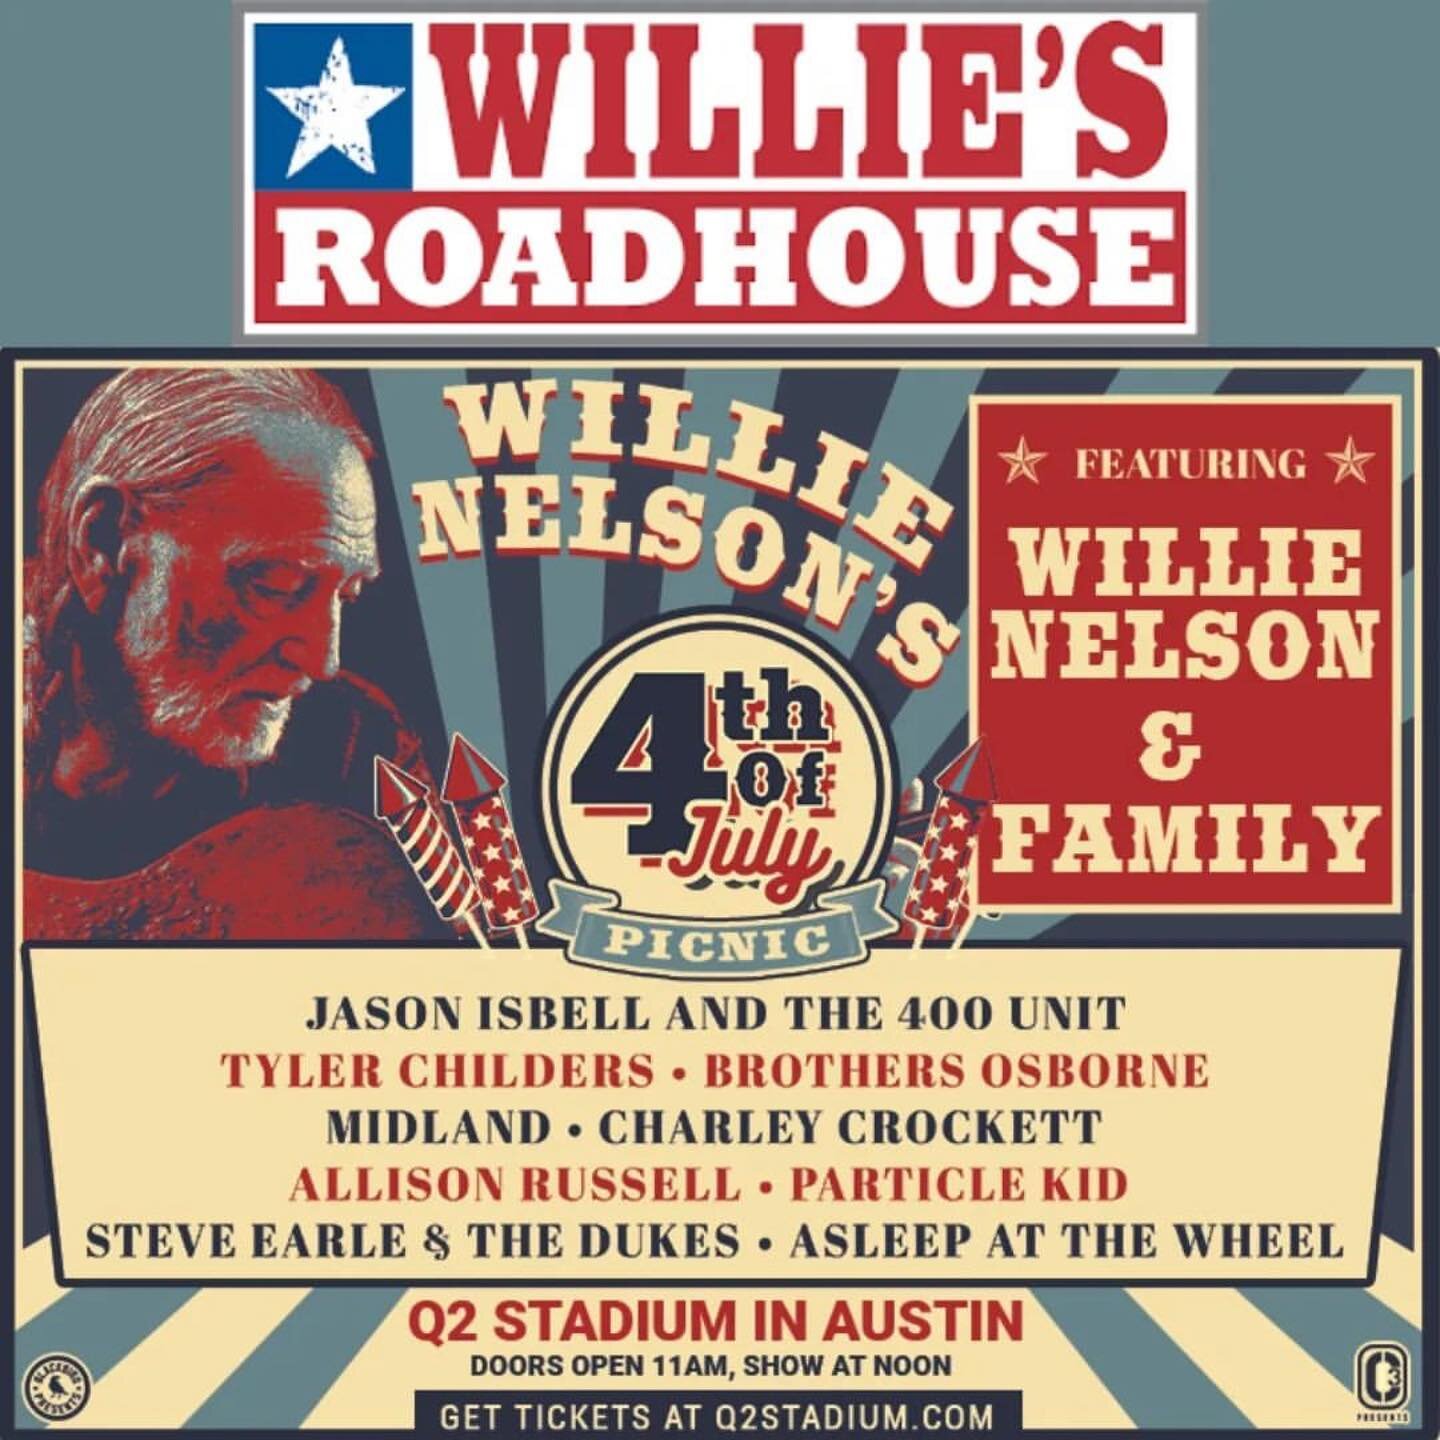 Our 4th of July Picnic will be broadcast LIVE from @q2stadium in Austin, Texas from 1pm-midnight ET on @siriusxm Channel 59 and the SXM app. Tune in!
If you made it to picnic in Austin come by our Willie&rsquo;s Joint tent for goodies and a photo wit